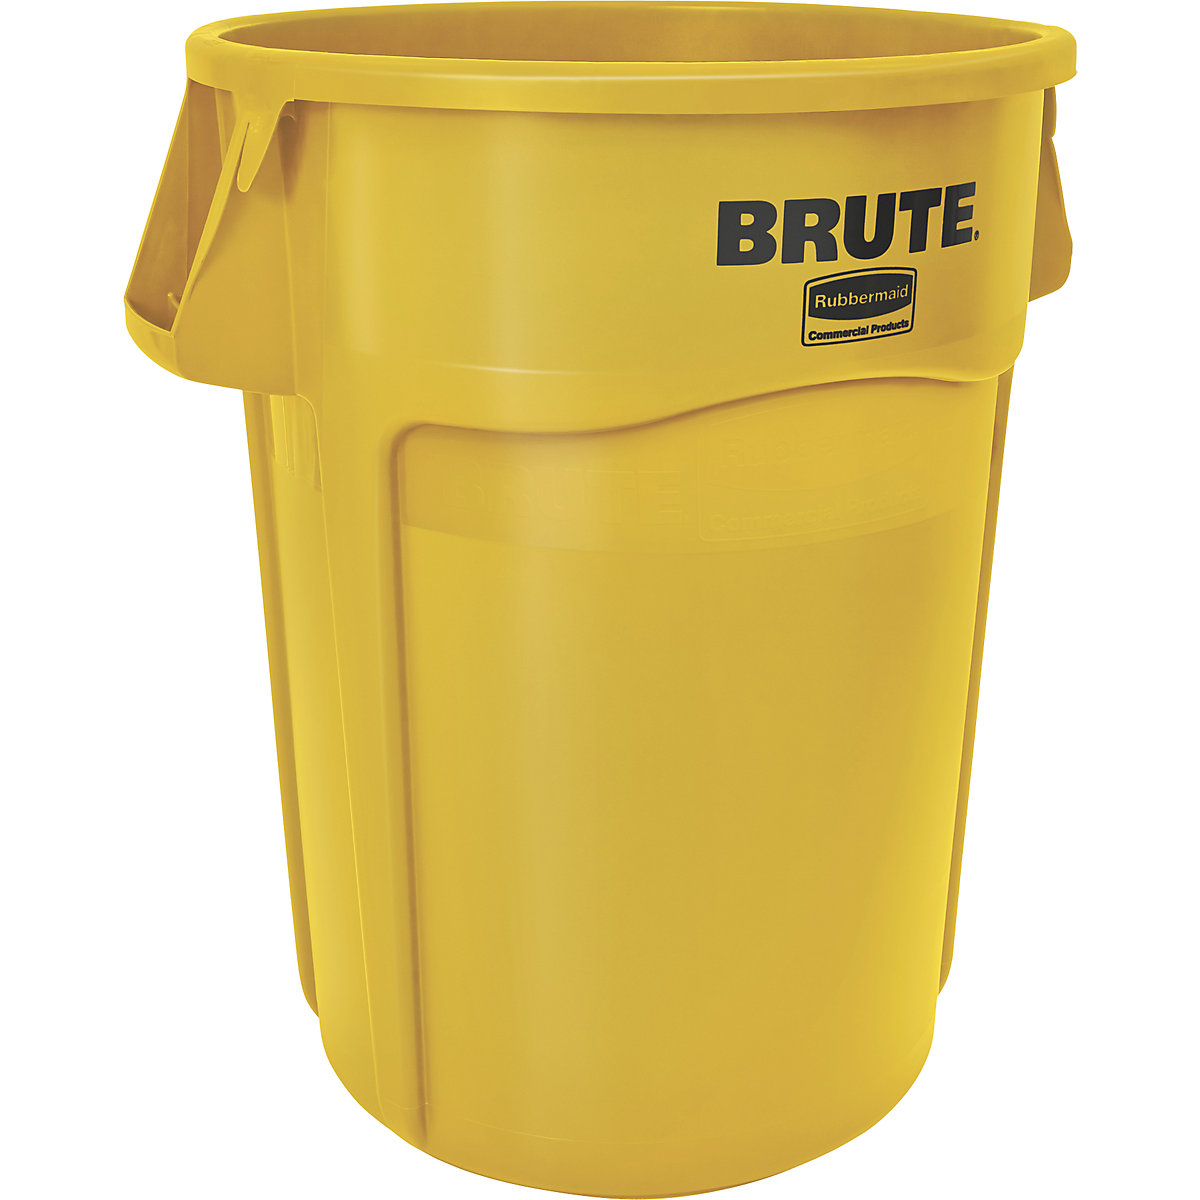 BRUTE® universal container, round – Rubbermaid, capacity 166 l, yellow-9